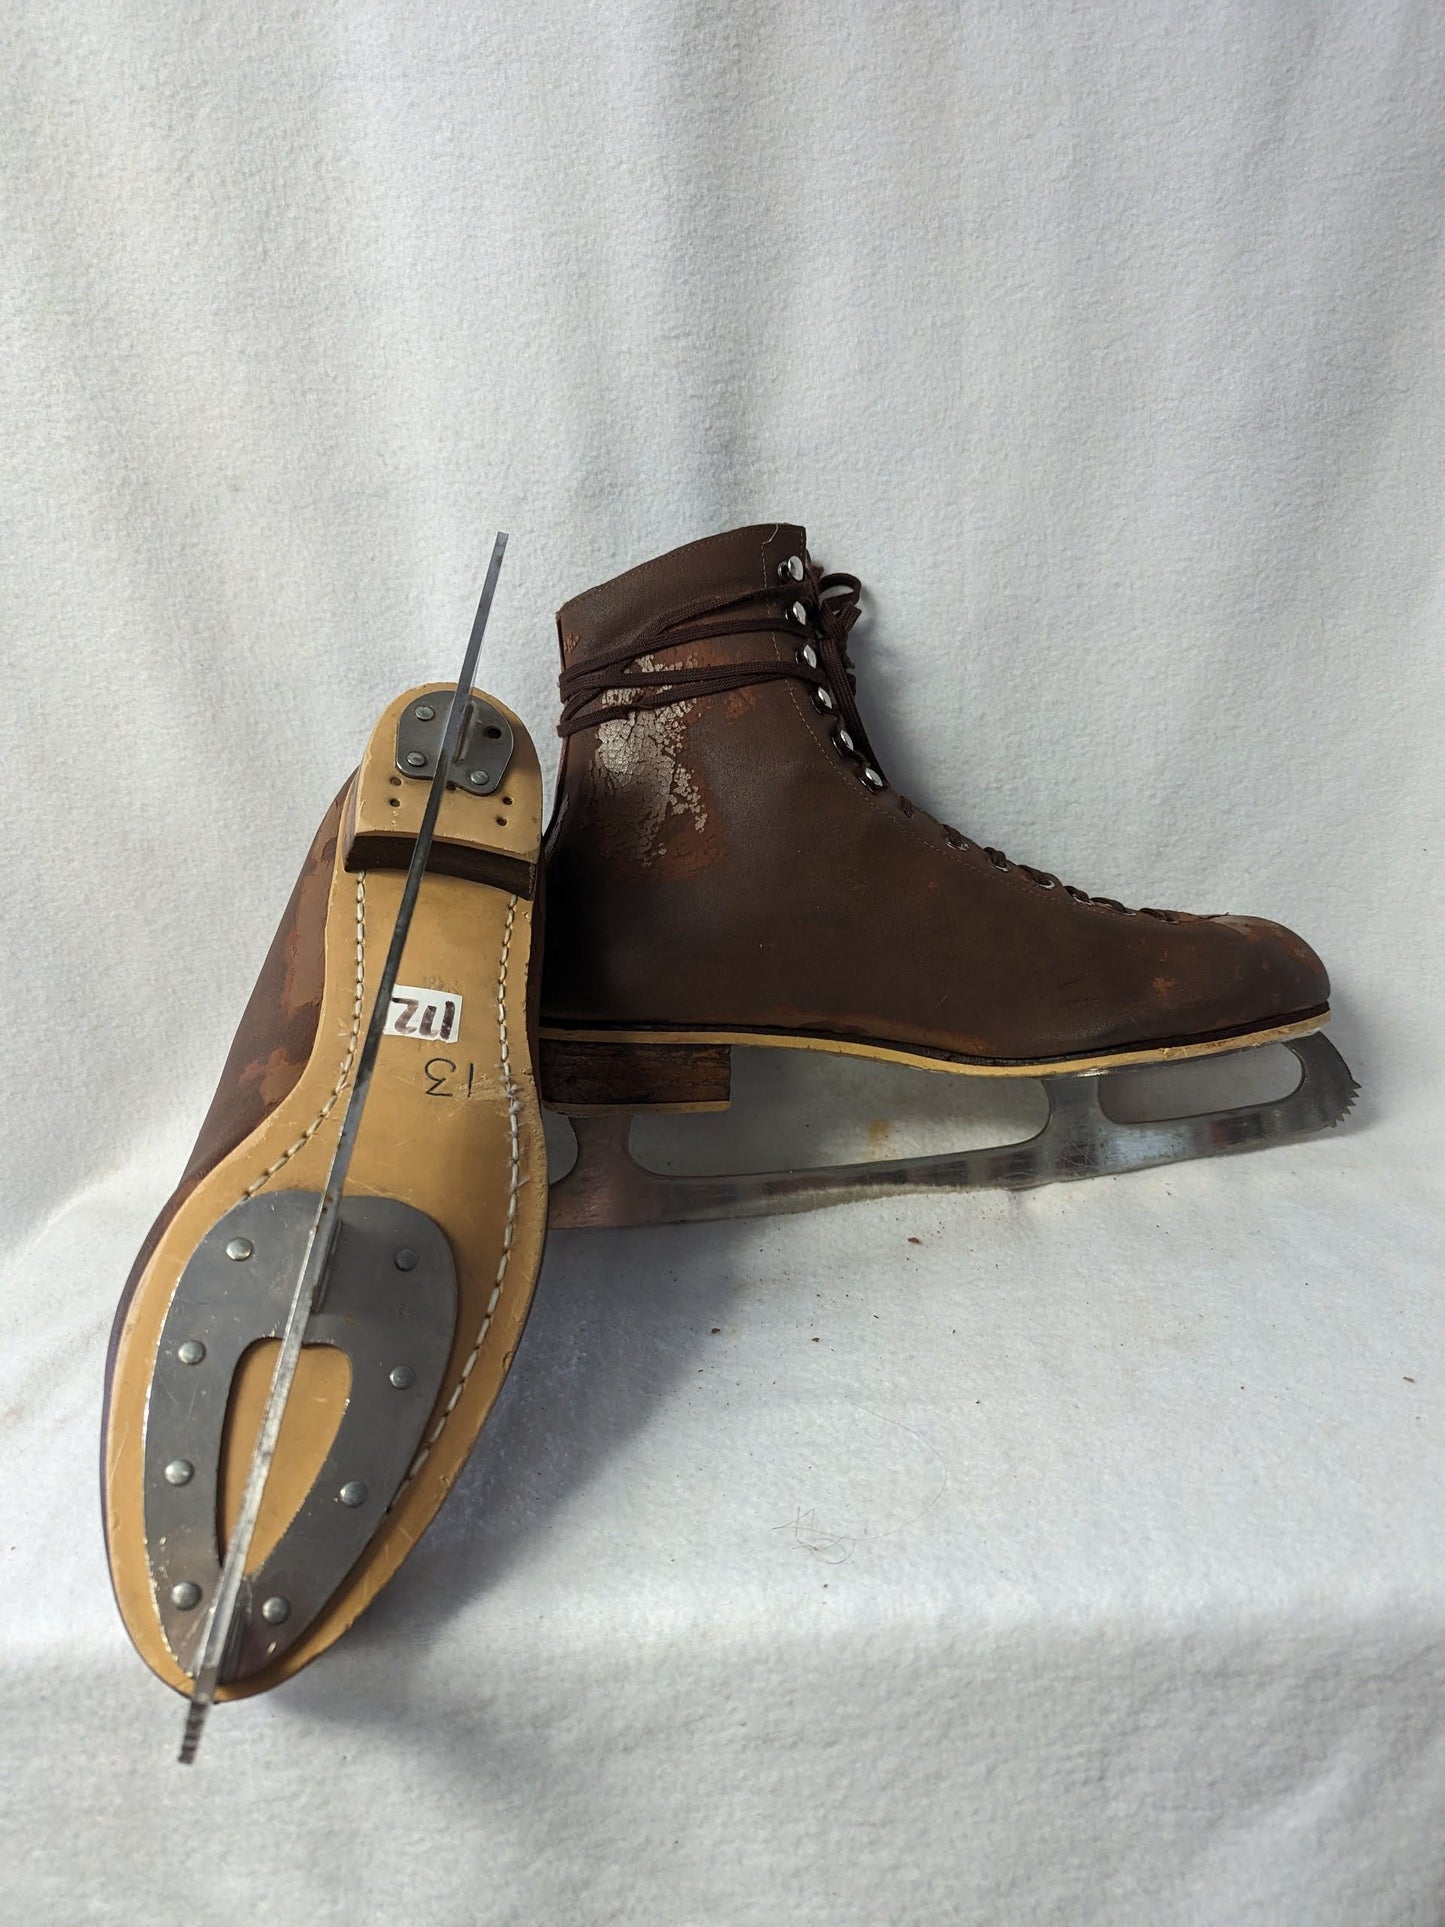 Rink Master Ice Skates Size 13 Color Brown Condition Used